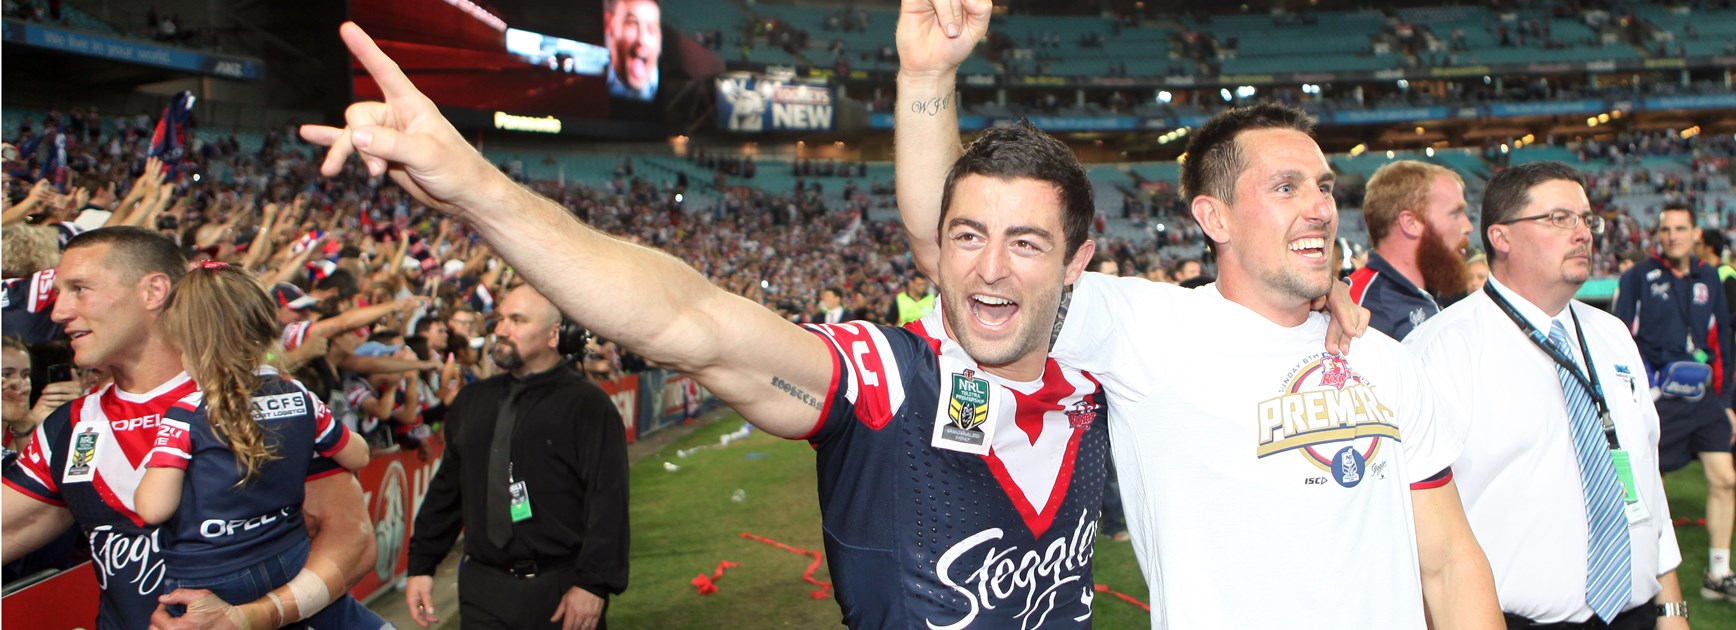 Minichiello adds his weight to finding local Sports Dad hero